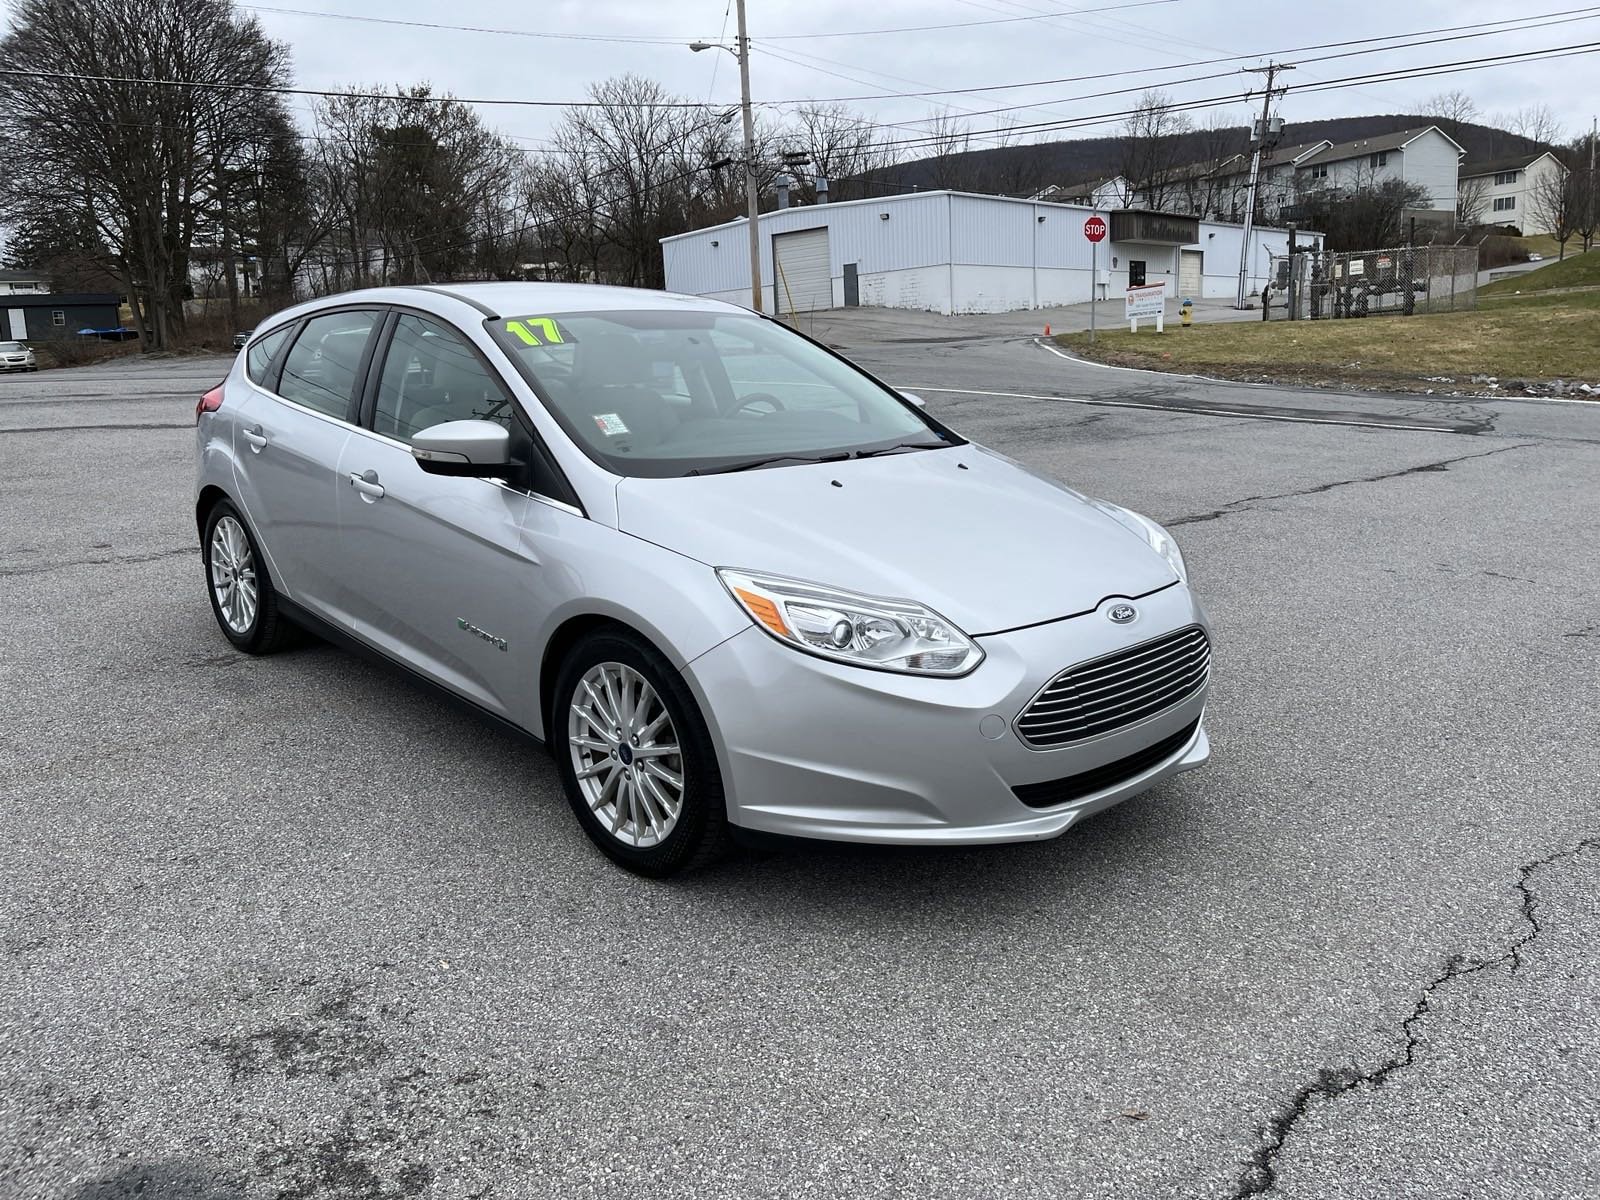 Used 2017 Ford Focus For Sale at Blaise Alexander Hyundai of Altoona | VIN:  1FADP3R49HL297435